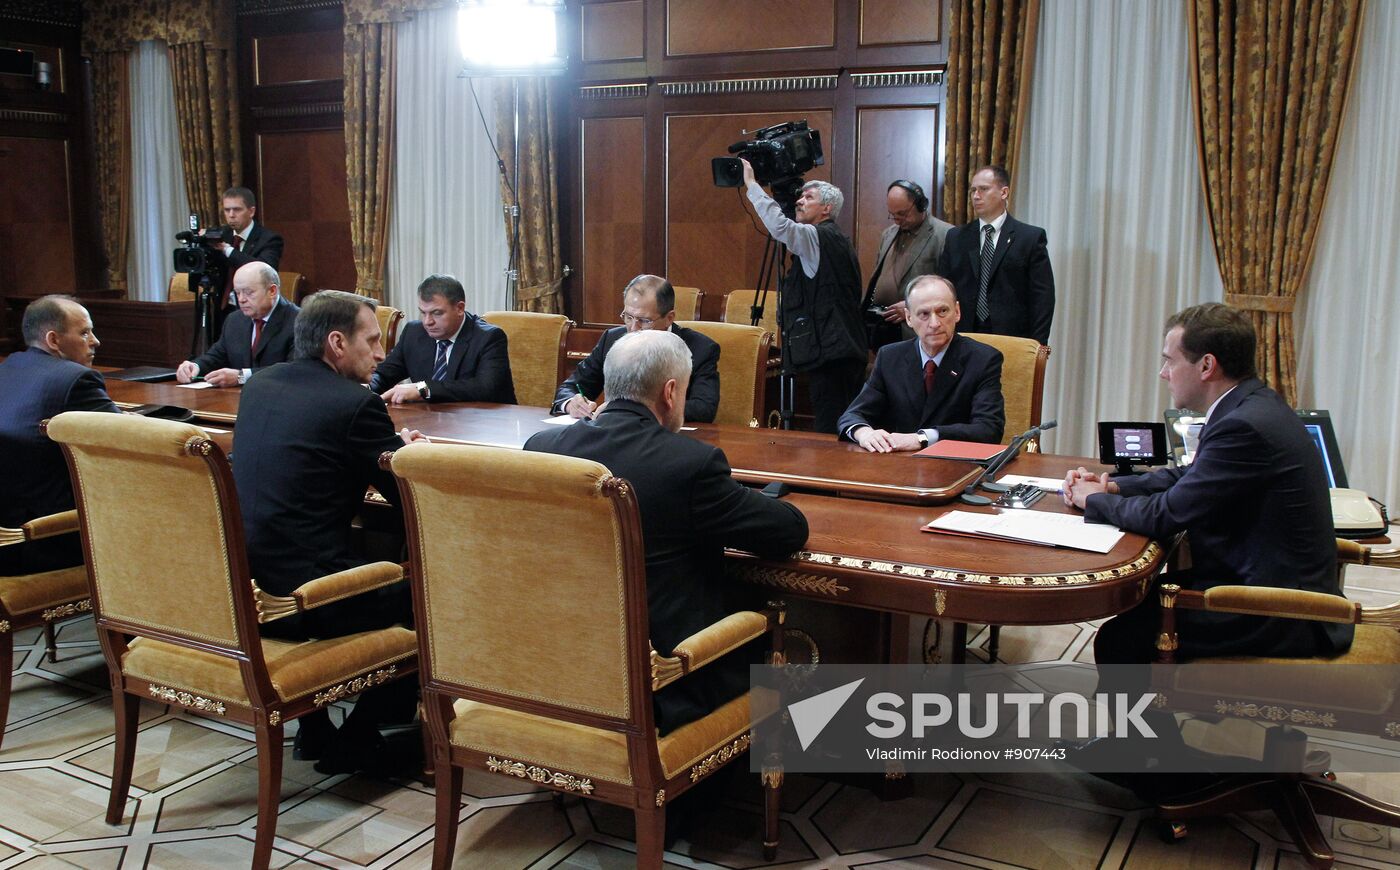 Dmitry Medvedev conducts Russian Security Council meeting